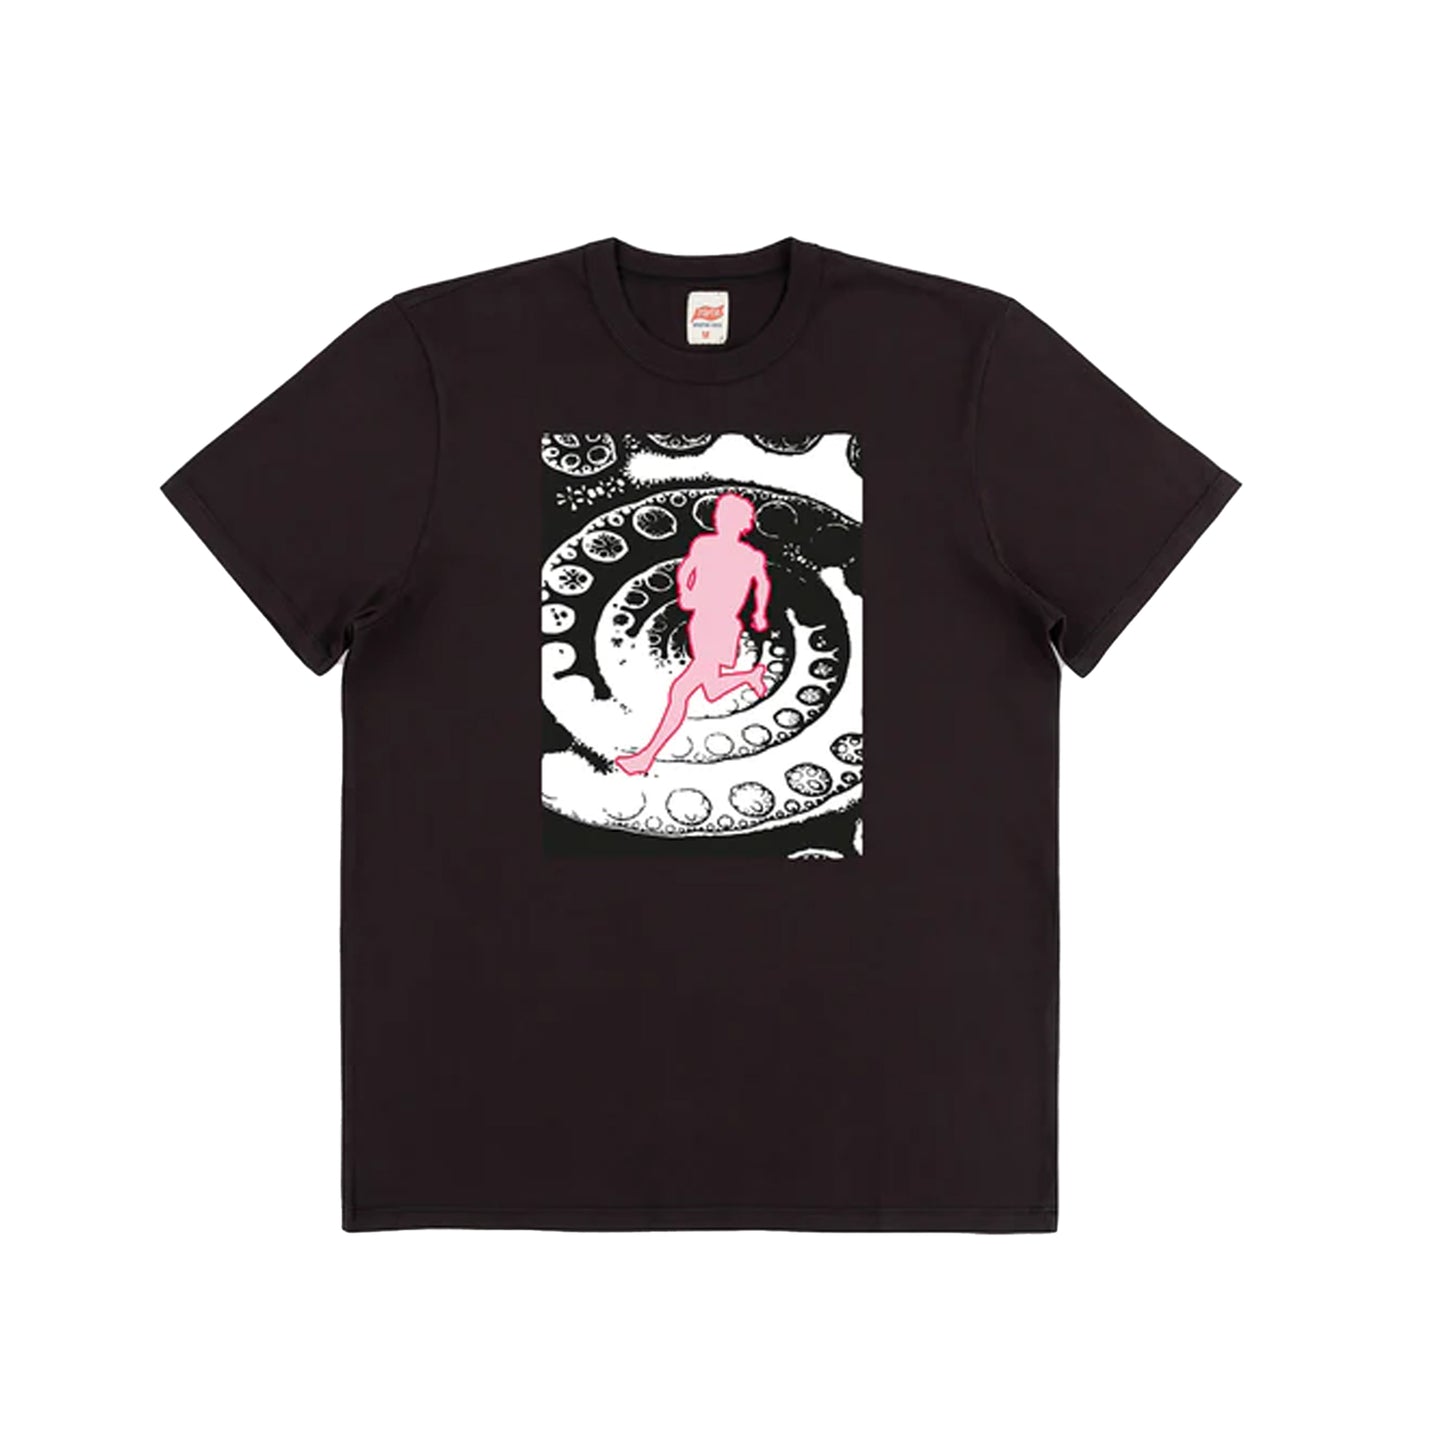 TSPTR Running is a Trip Tee - Black - SALE 35% OFF